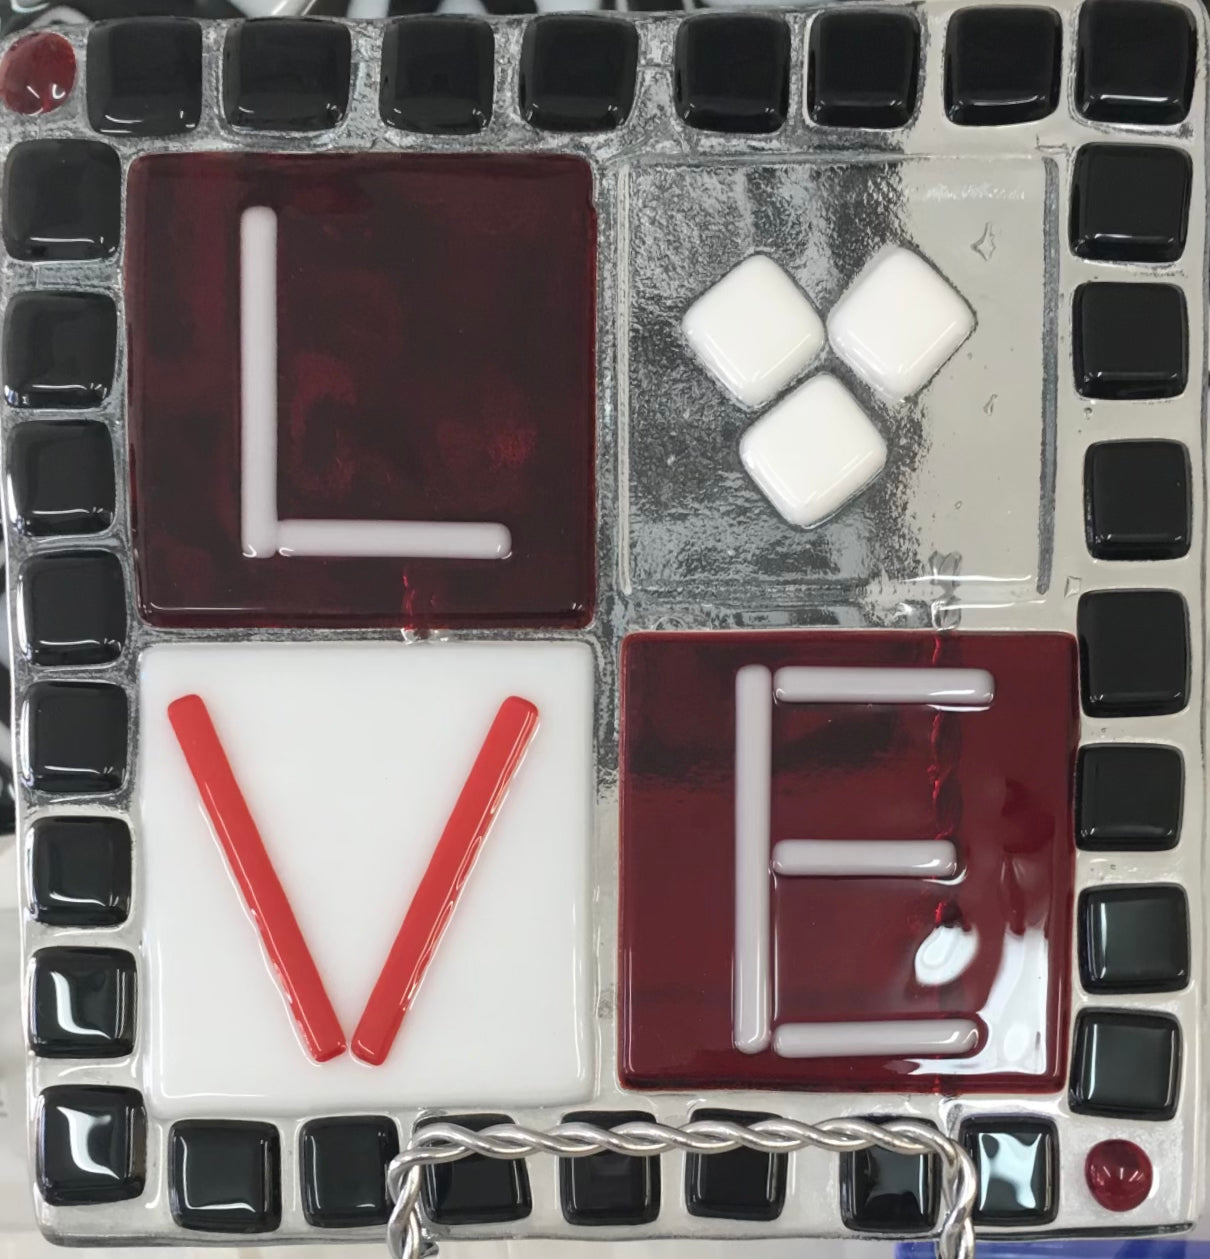 6" plate or suncatcher Fused glass, March 9, 1-3